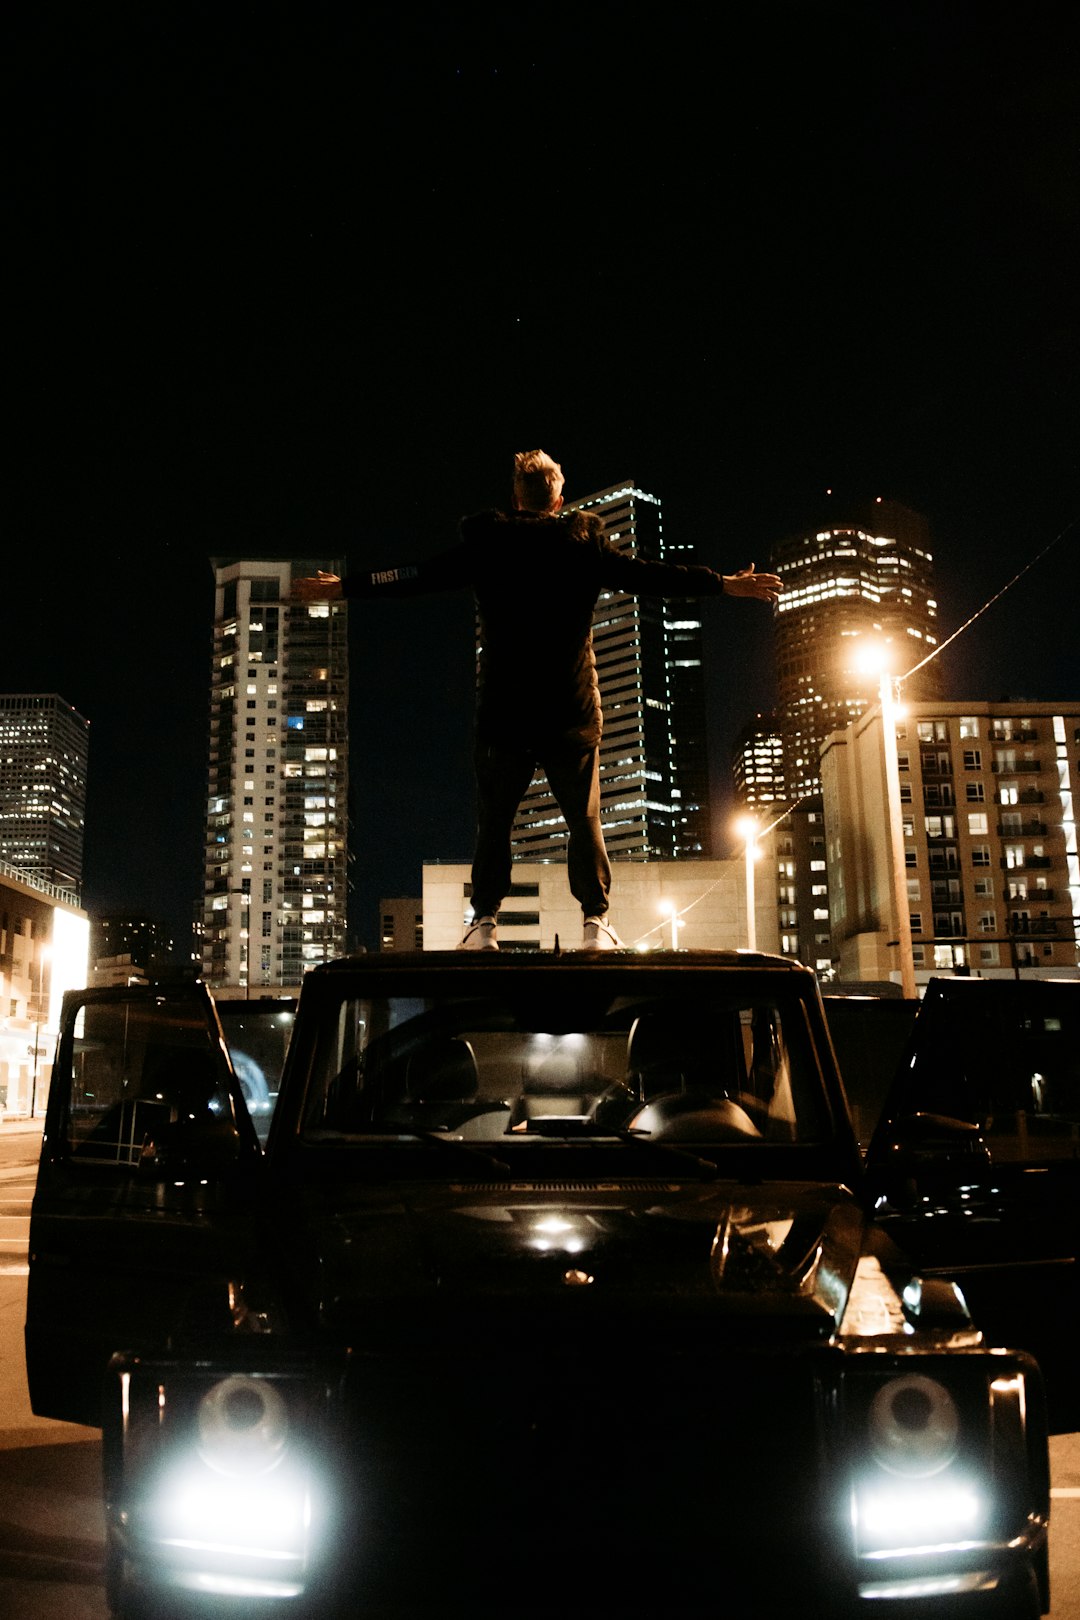 man in black t-shirt and black pants standing on black car during night time